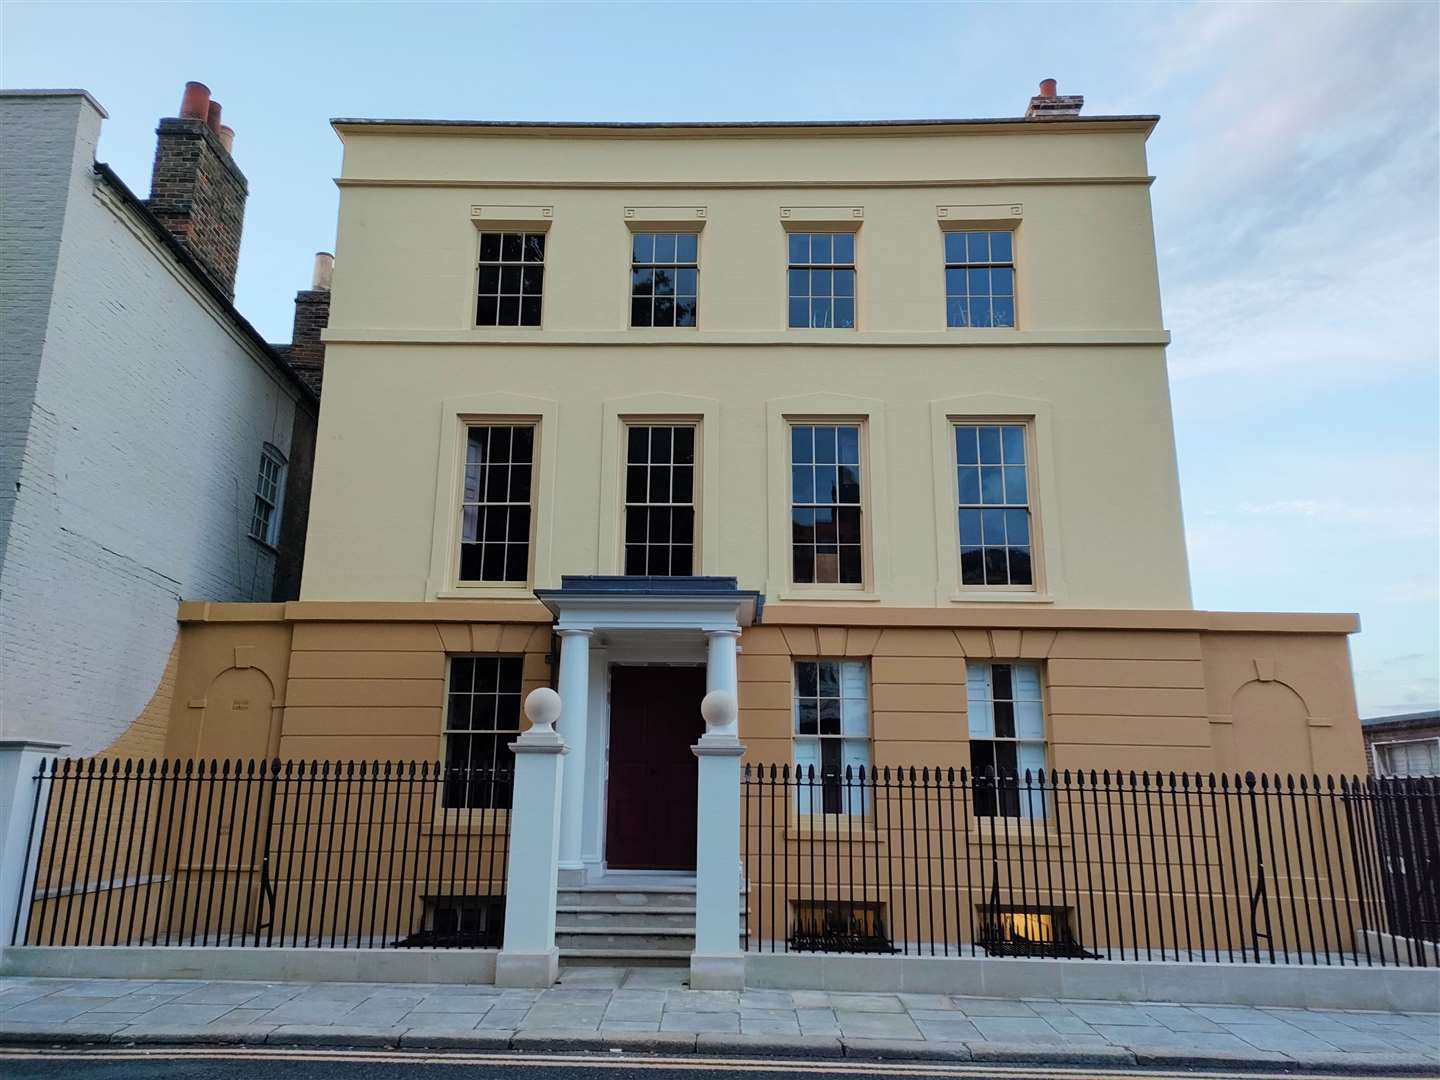 The front of Chatham House has been restored